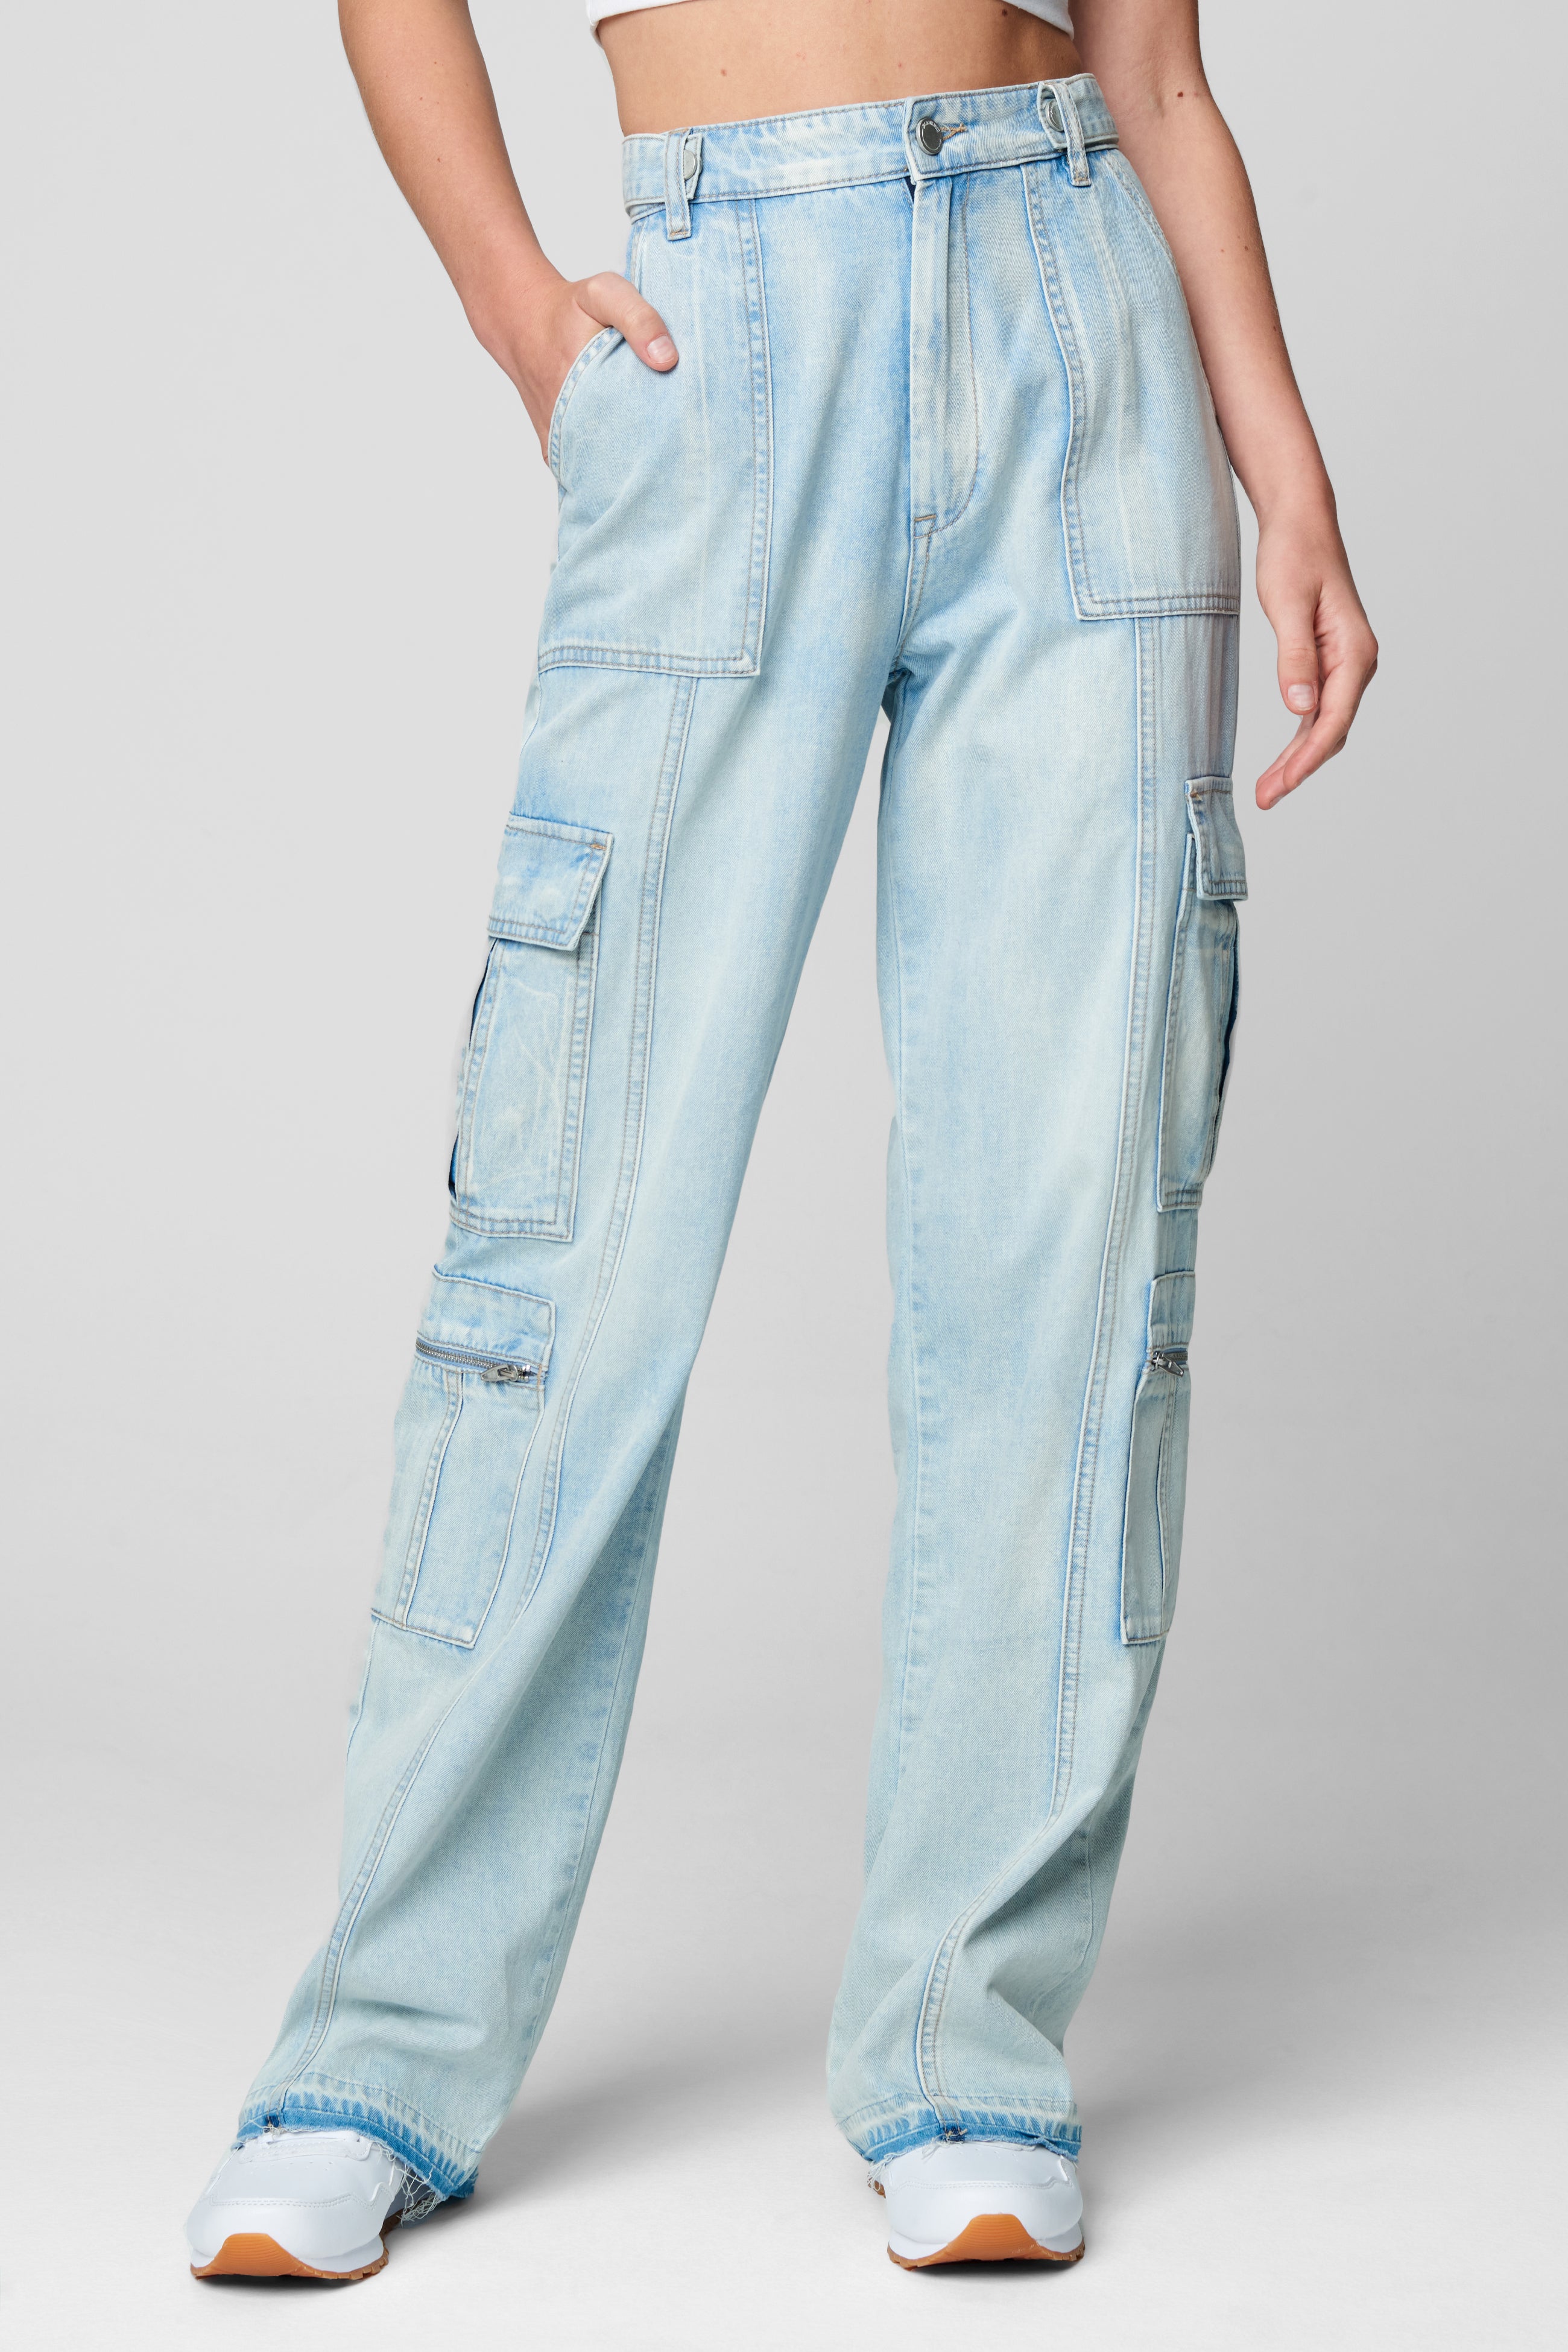 Call My Name Boutique | LIT Cargo Blue Pants